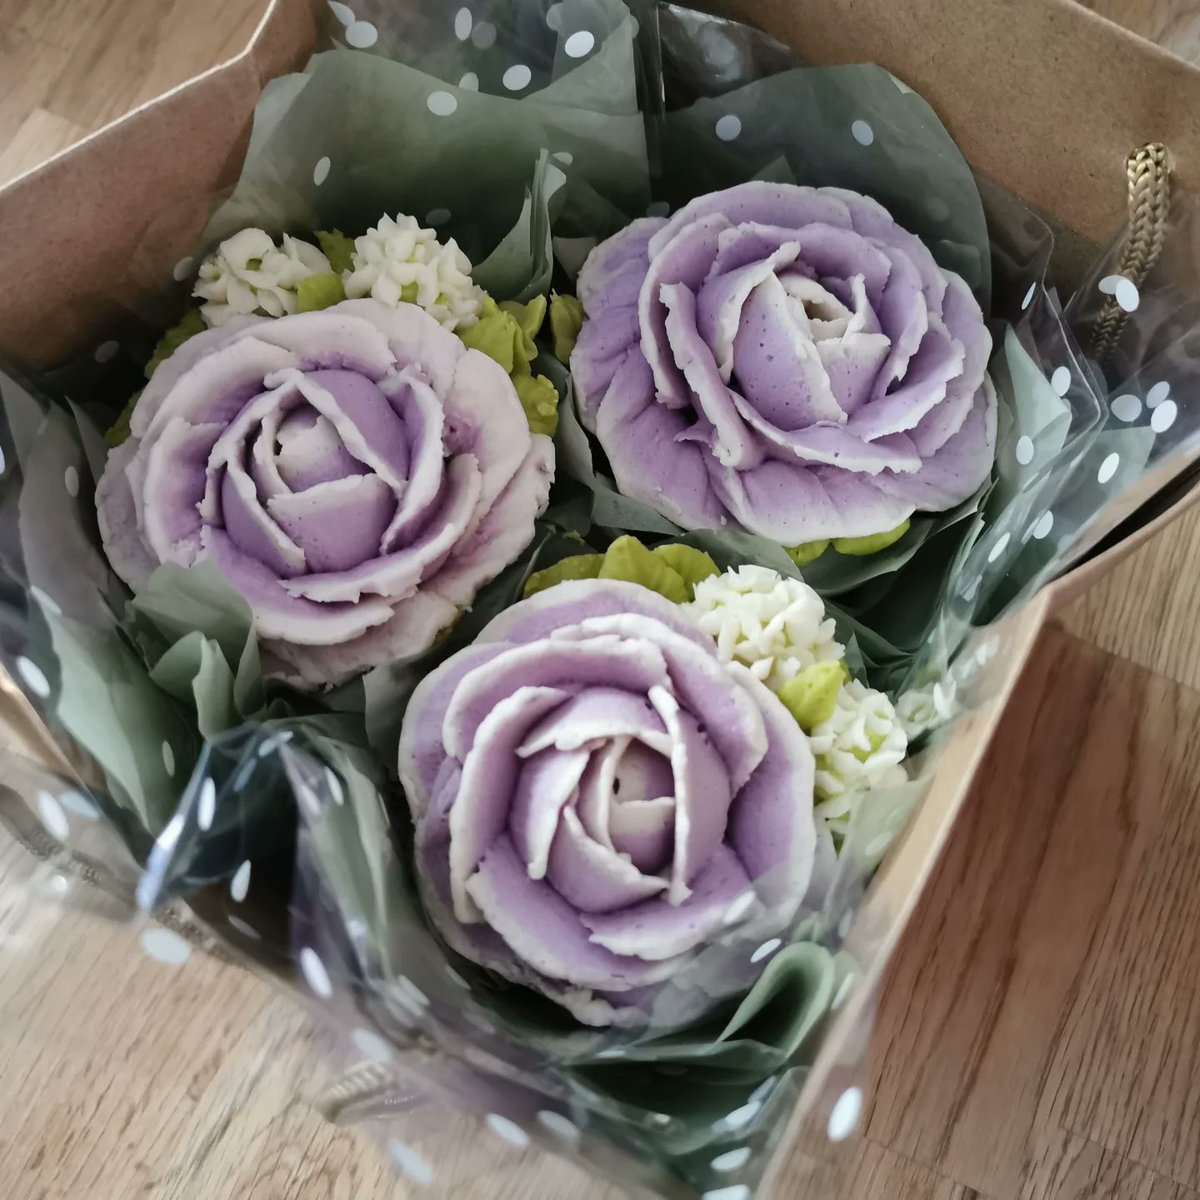 Something a bit different - cupcake bouquets or 'bouqcakes' ordered by my lovely sister-in-law for some friends' birthdays 🎉

Vanilla roses and hyacinths, all beautifully wrapped & presented in a gift bag ❤️

#bouqcake #cupcakez #edibleflowers #floralcupcakes #flowersyoucaneat